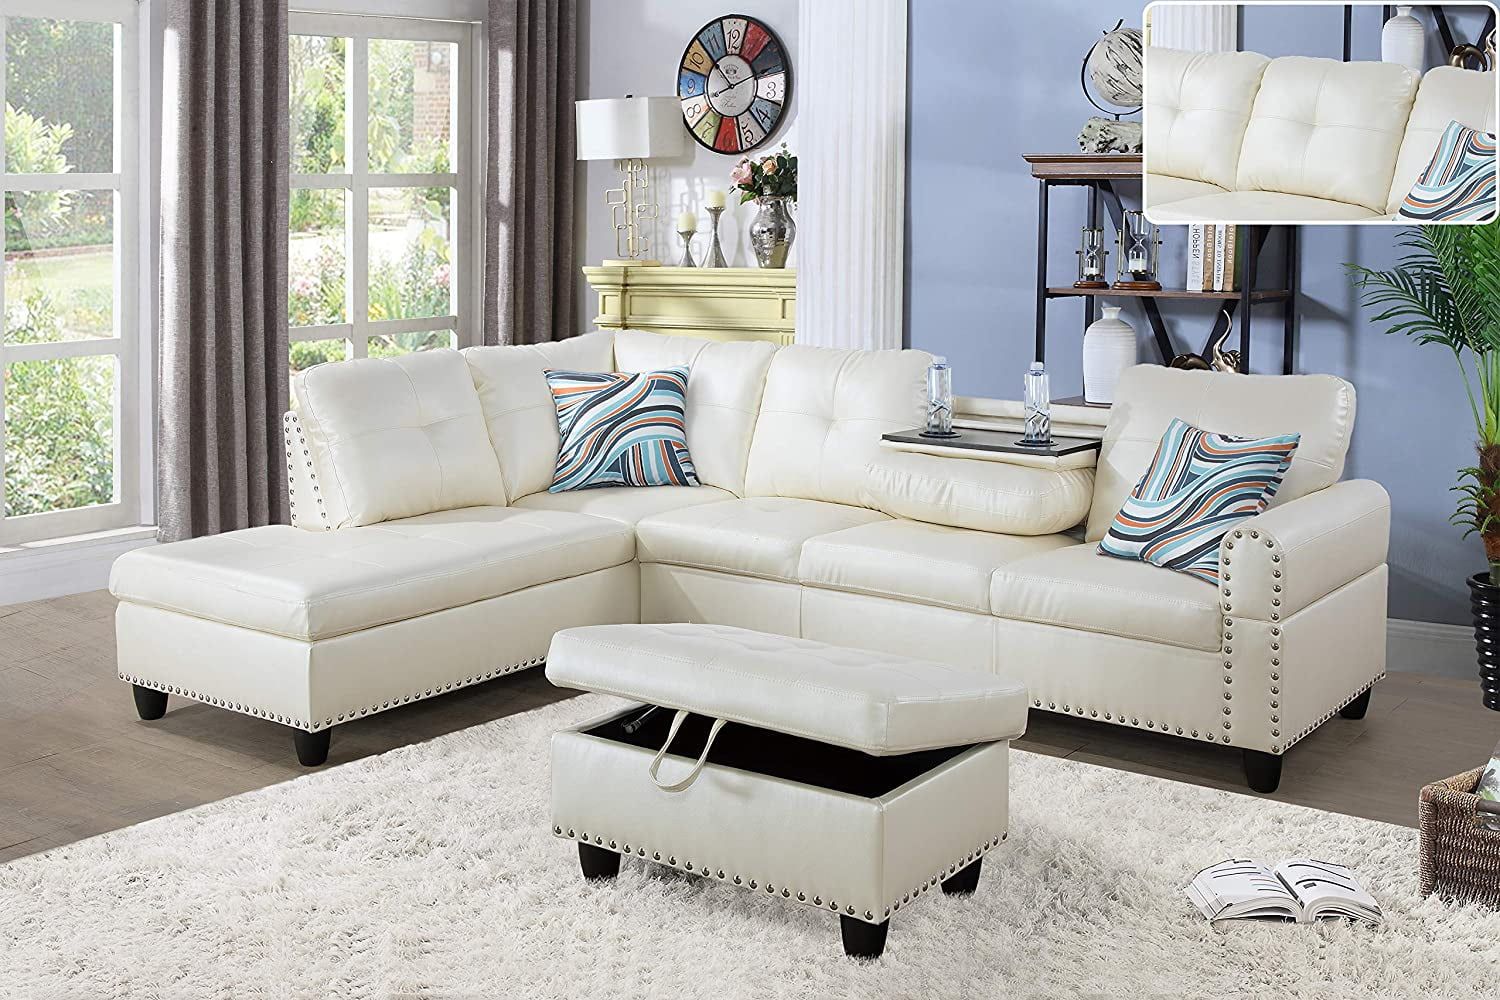 Ainehome Faux Leather Sectional Sofa, Living Room Set With Drop Down Table  & Cup Holder – White – Walmart Pertaining To Faux Leather Sectional Sofa Sets (View 15 of 15)